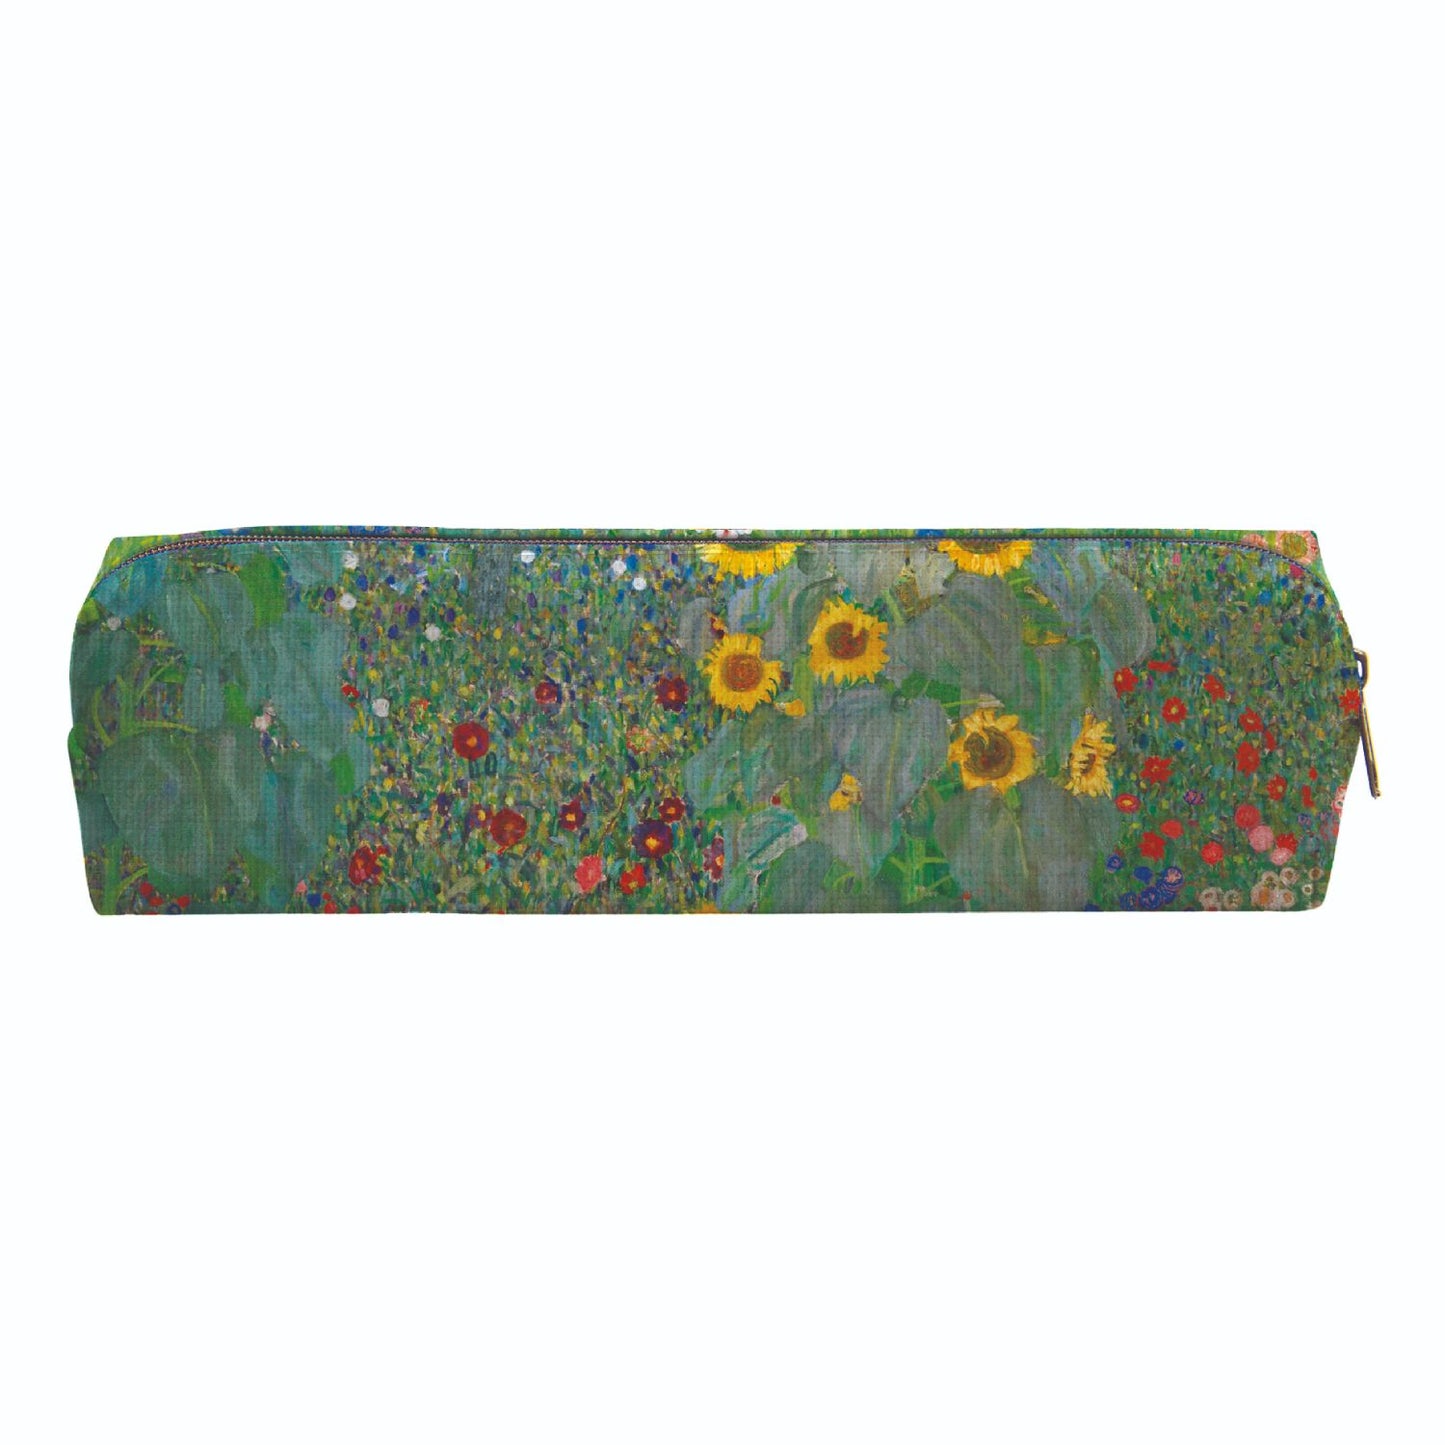 Gifted Stationery Klimt Fabric Pencil Case